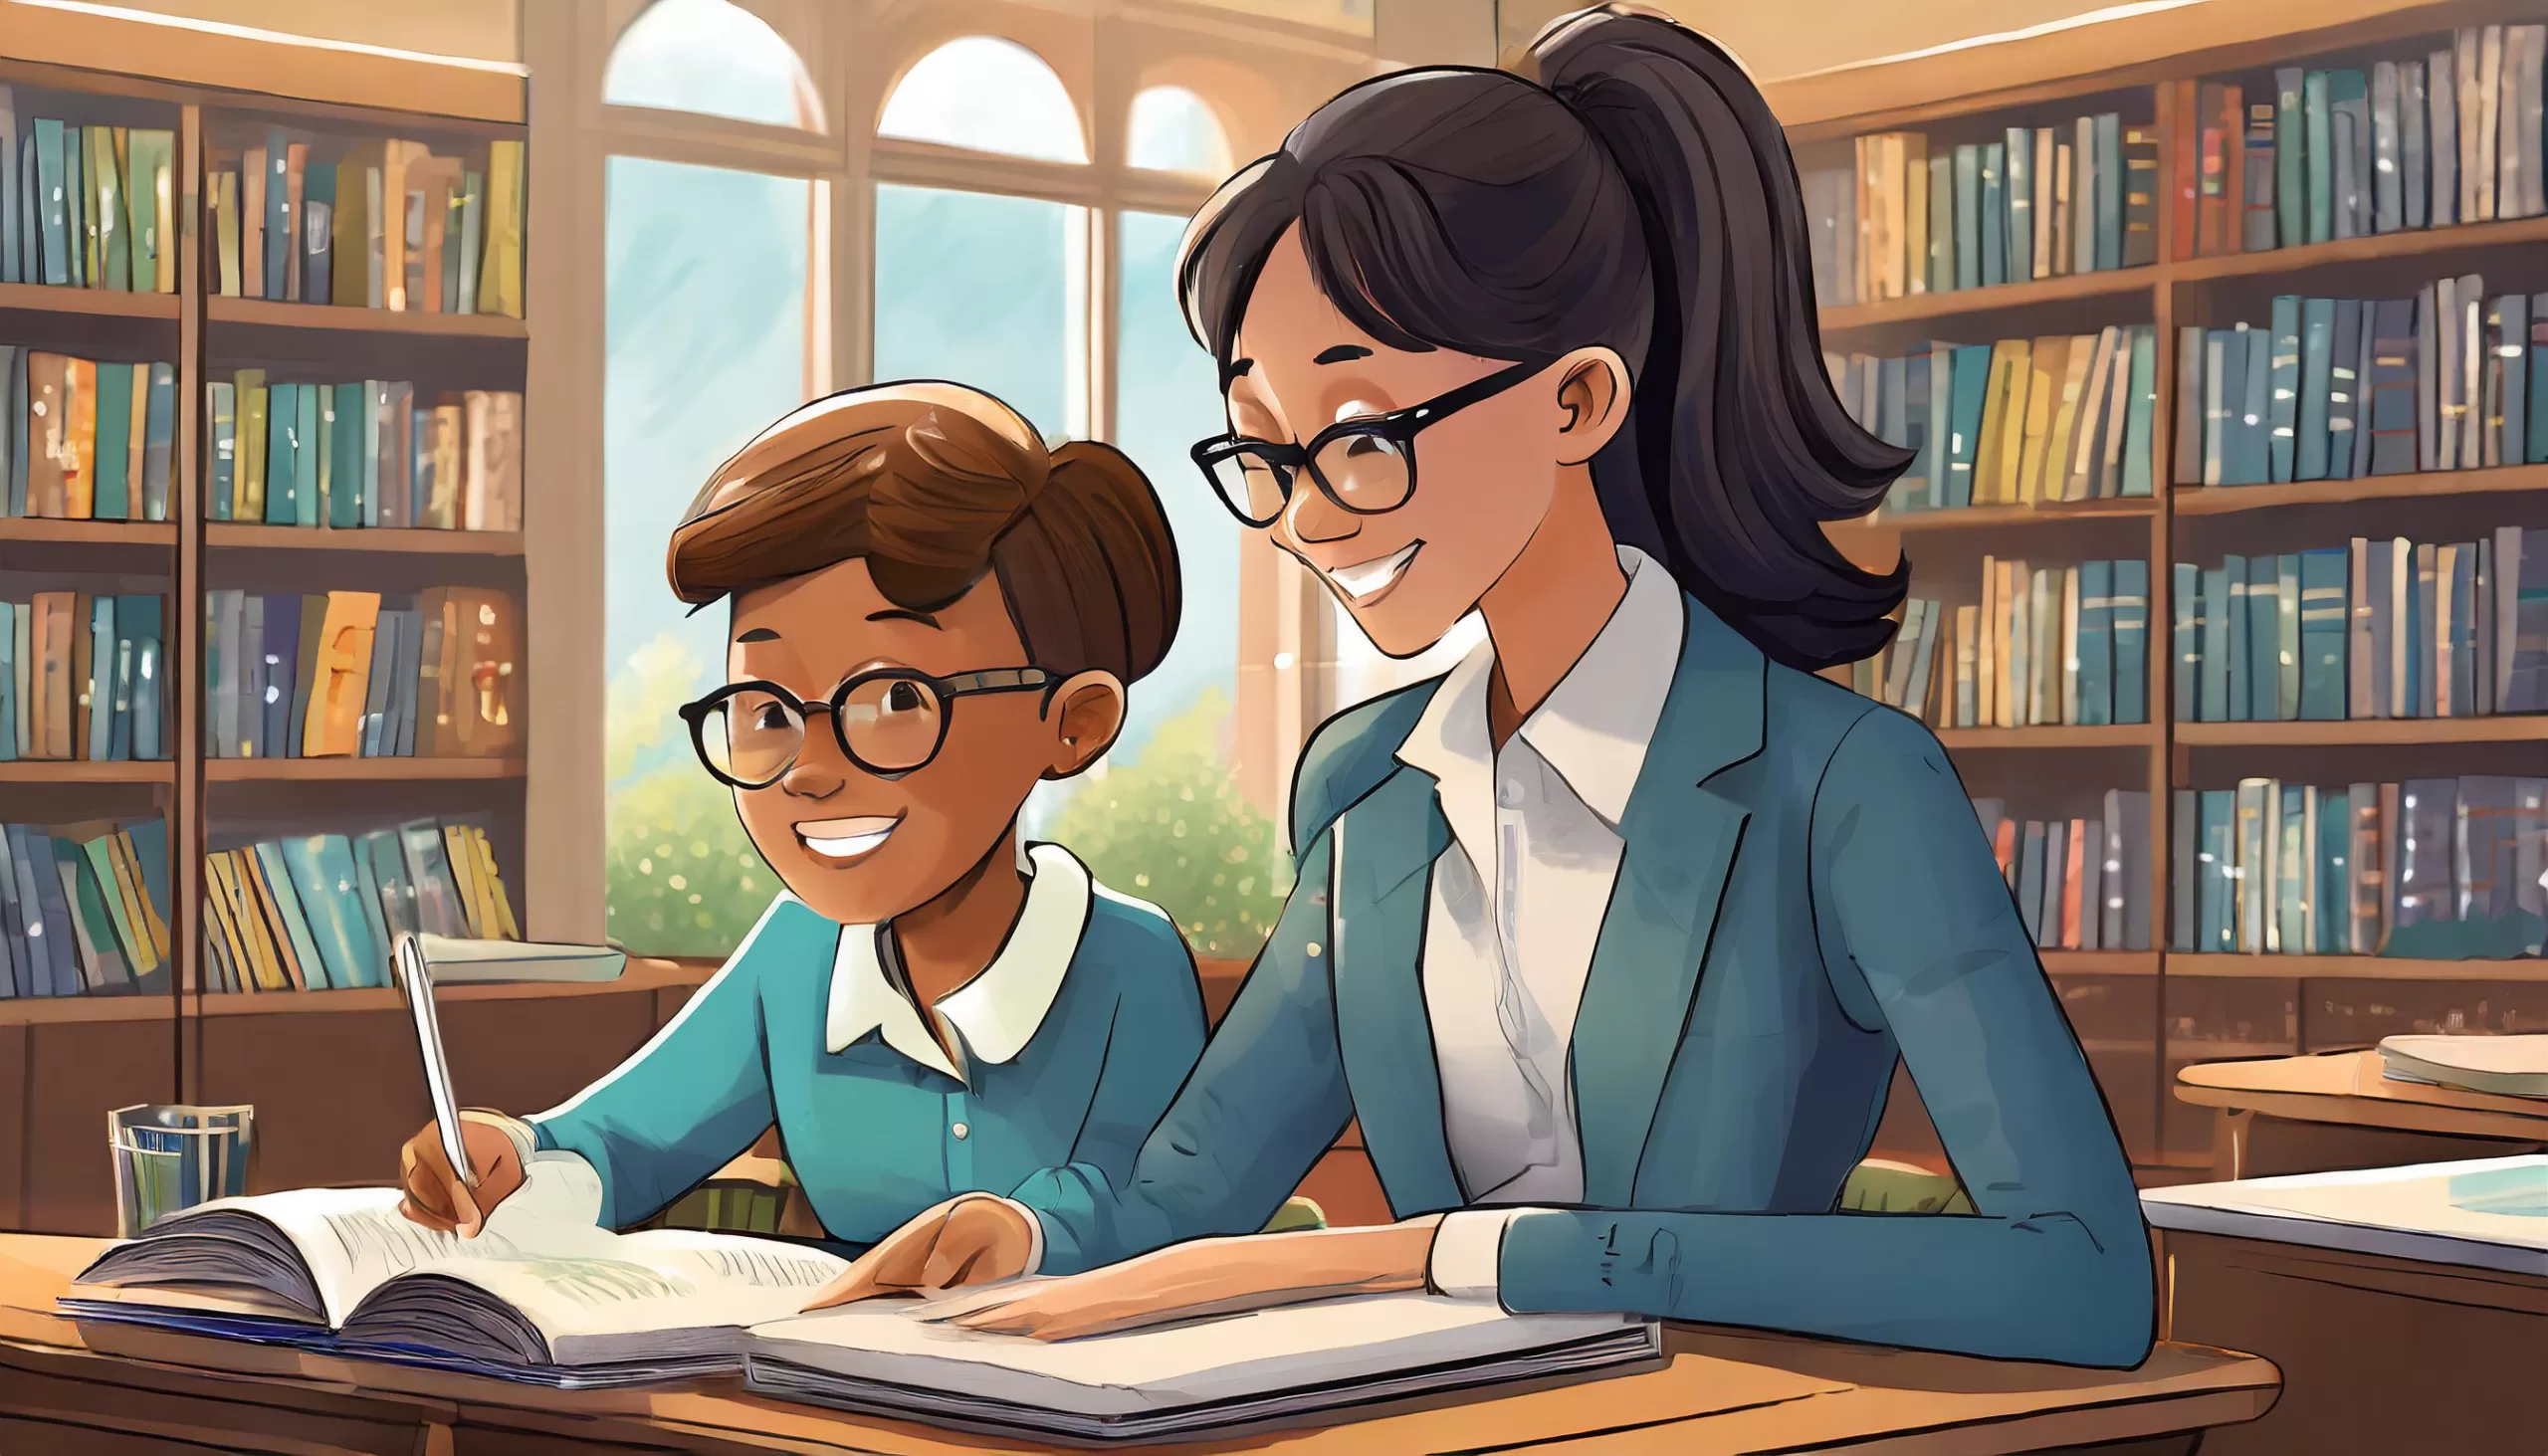 Firefly Cartoon style depiction of a teen tutoring a younger student in a library setting illustrat scaled